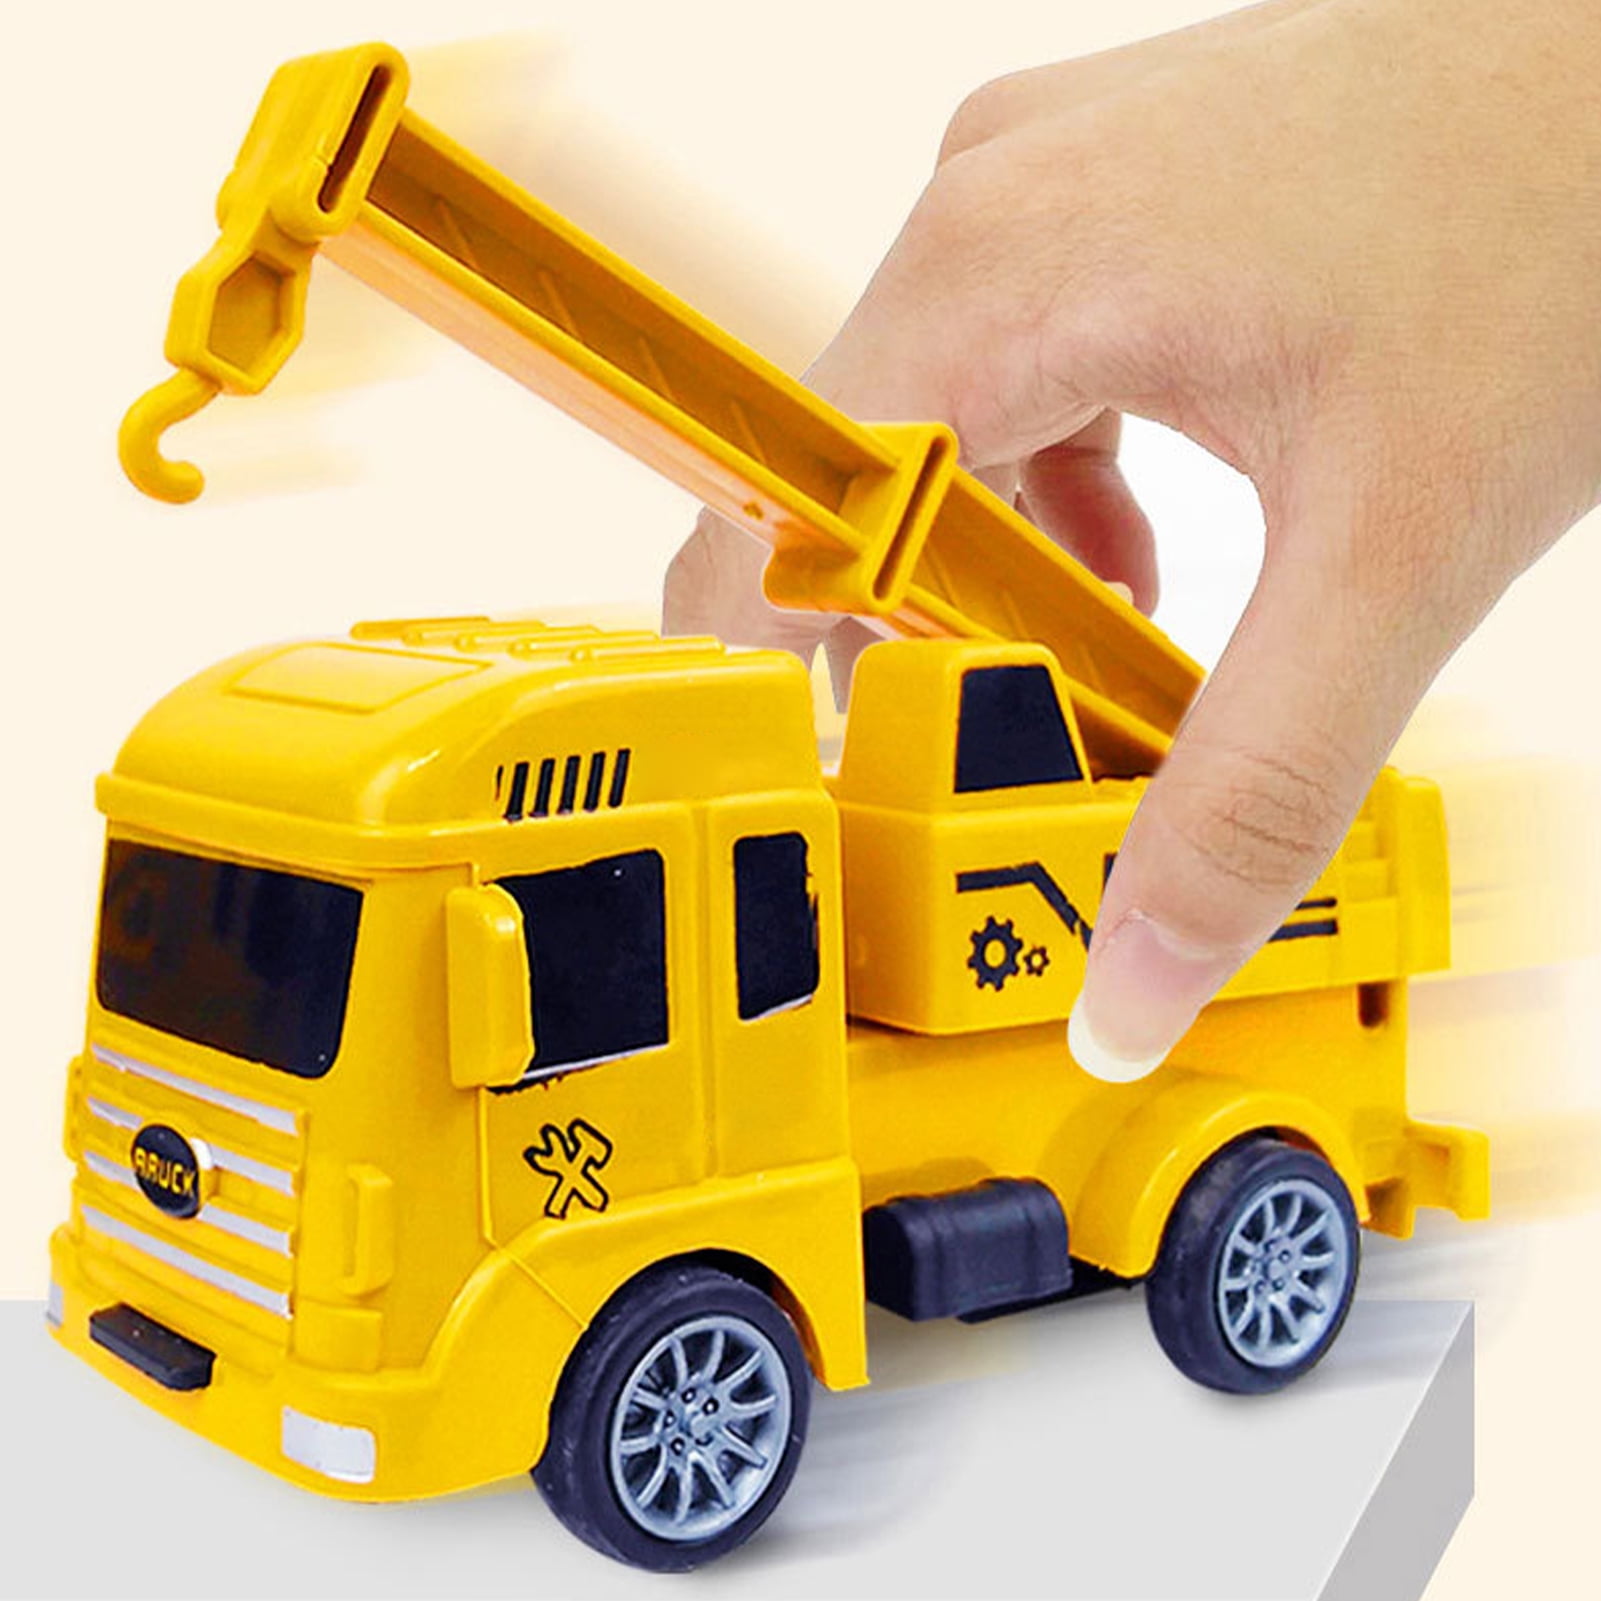 qollorette Wind Up Toy Vehicle, Assemble 3D Puzzle Crane Toy Construction  Truck Kids Learning Educational Building Toy - Mini Pull Back Toy for Children  Boys & Girls - Yahoo Shopping